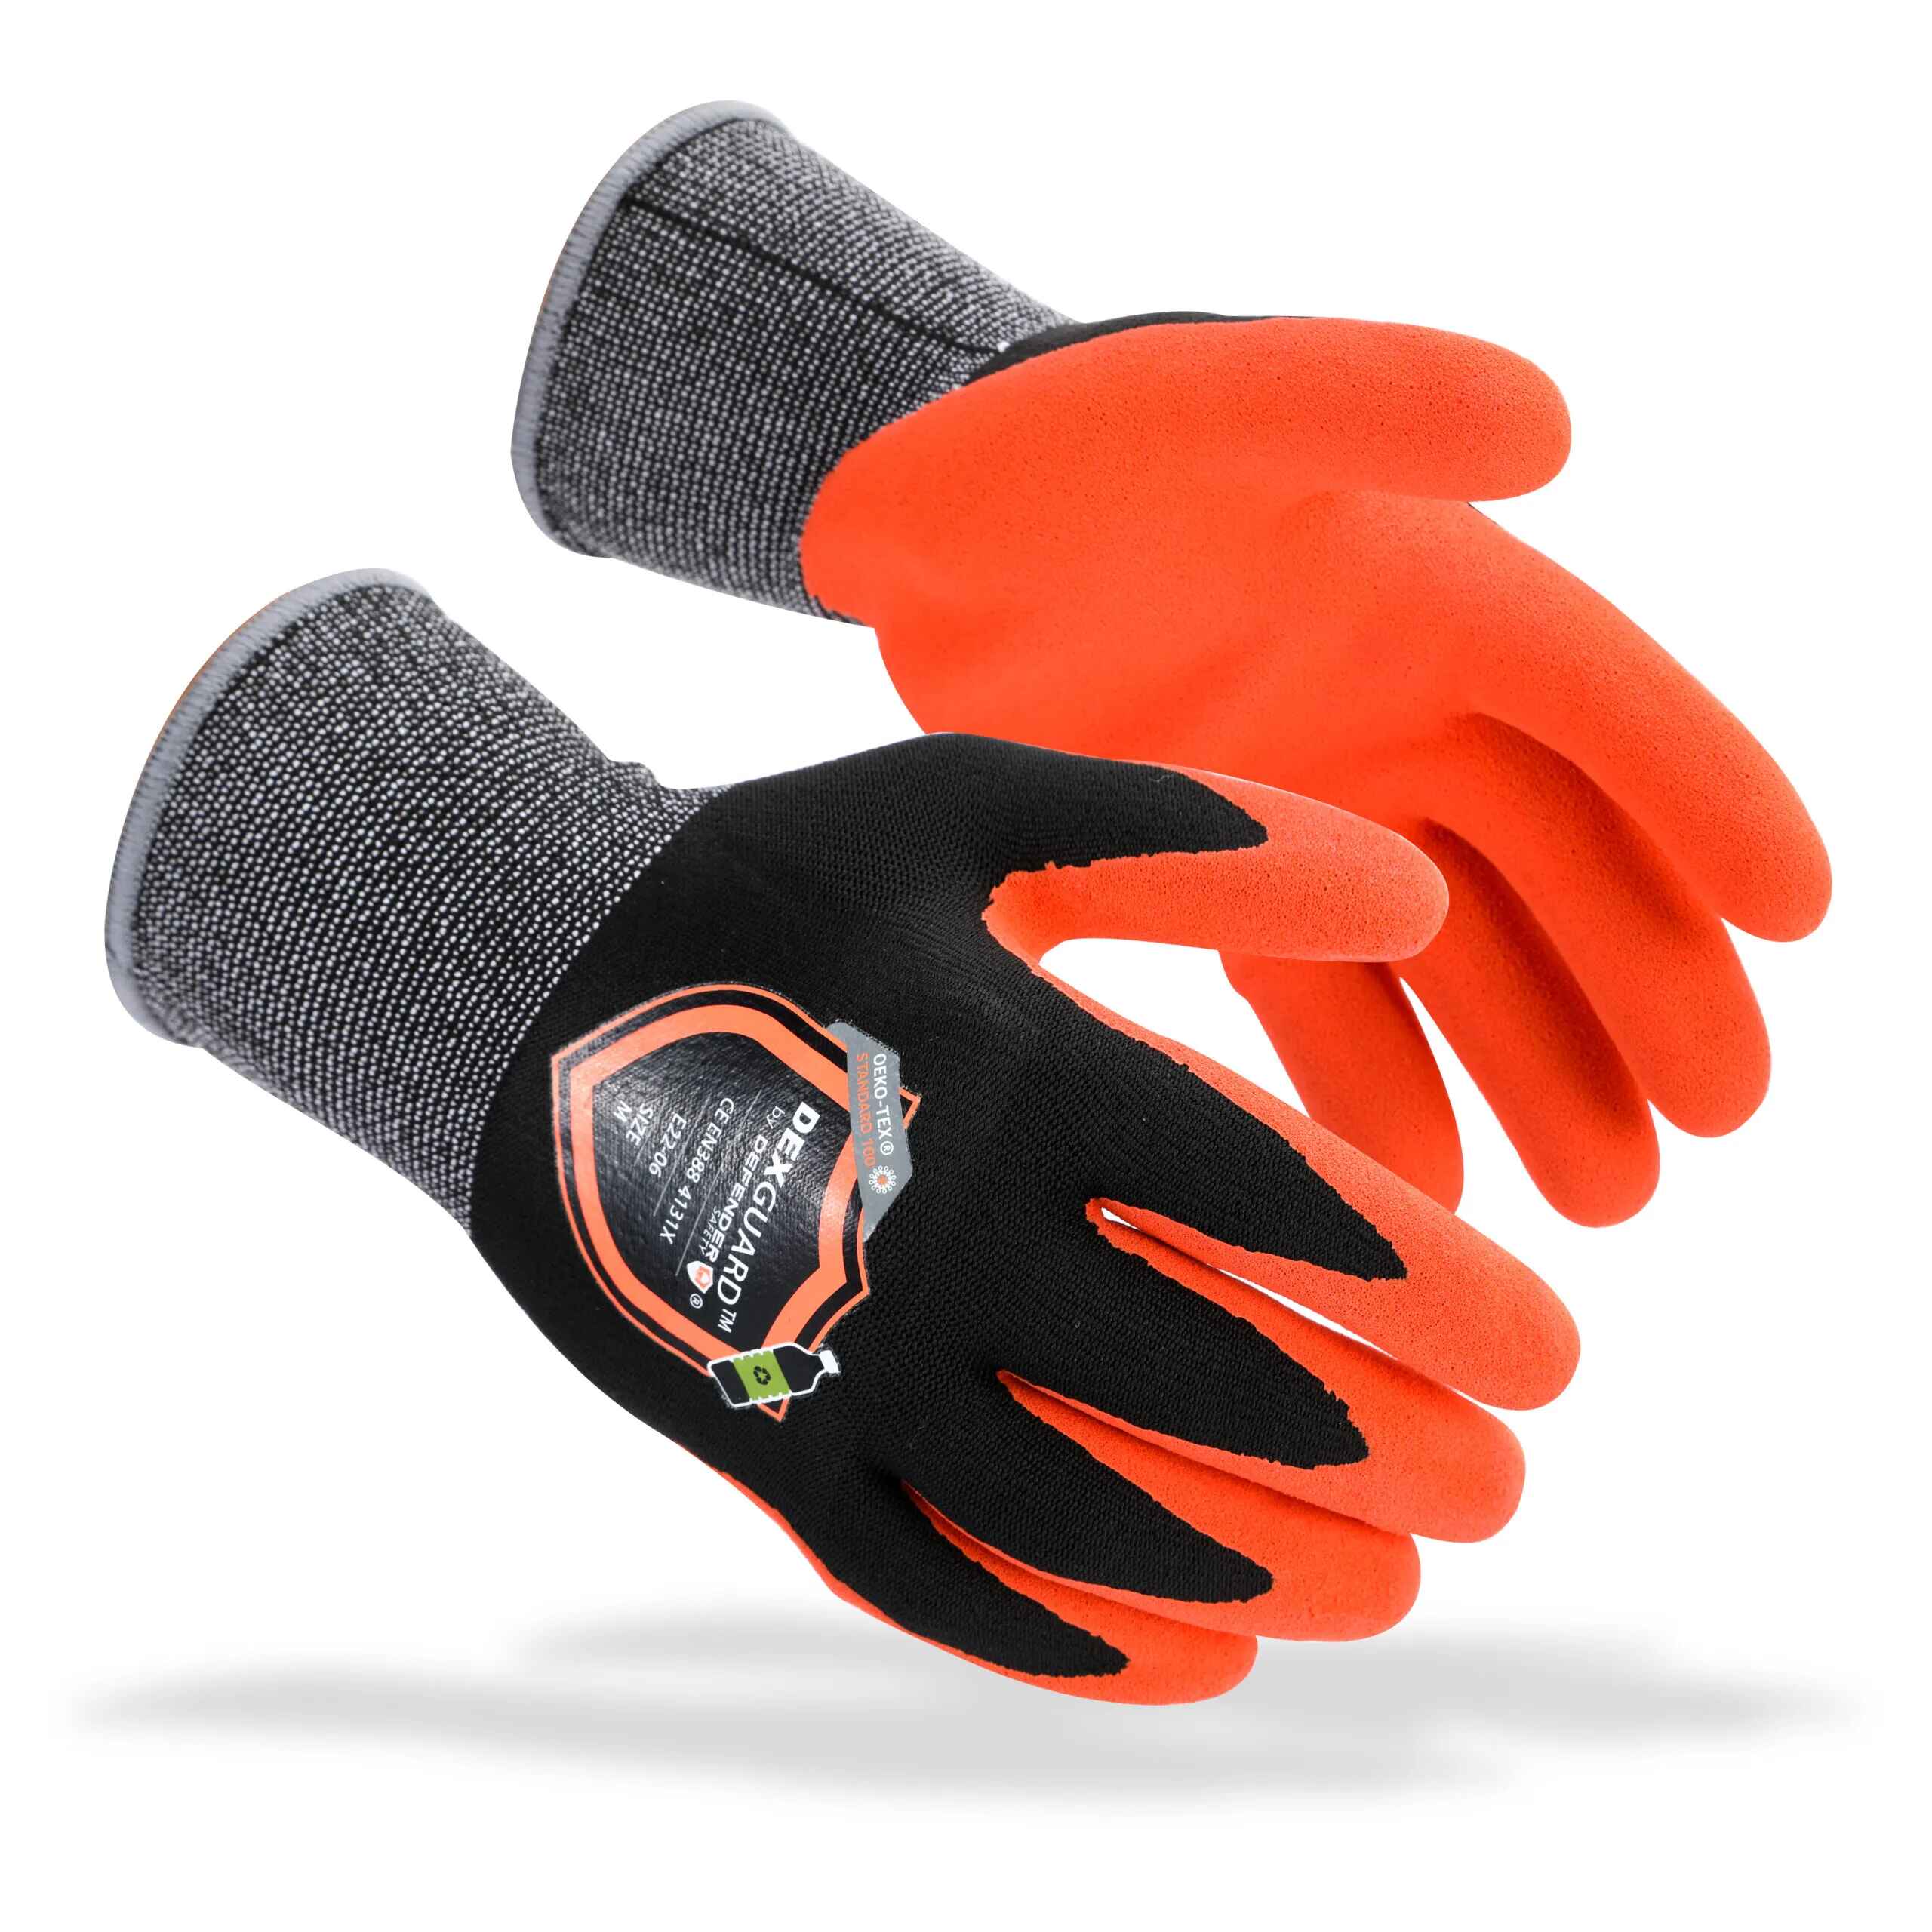 Nitrile Coated Cut Resistant Hand Gloves - Authorized Dealer